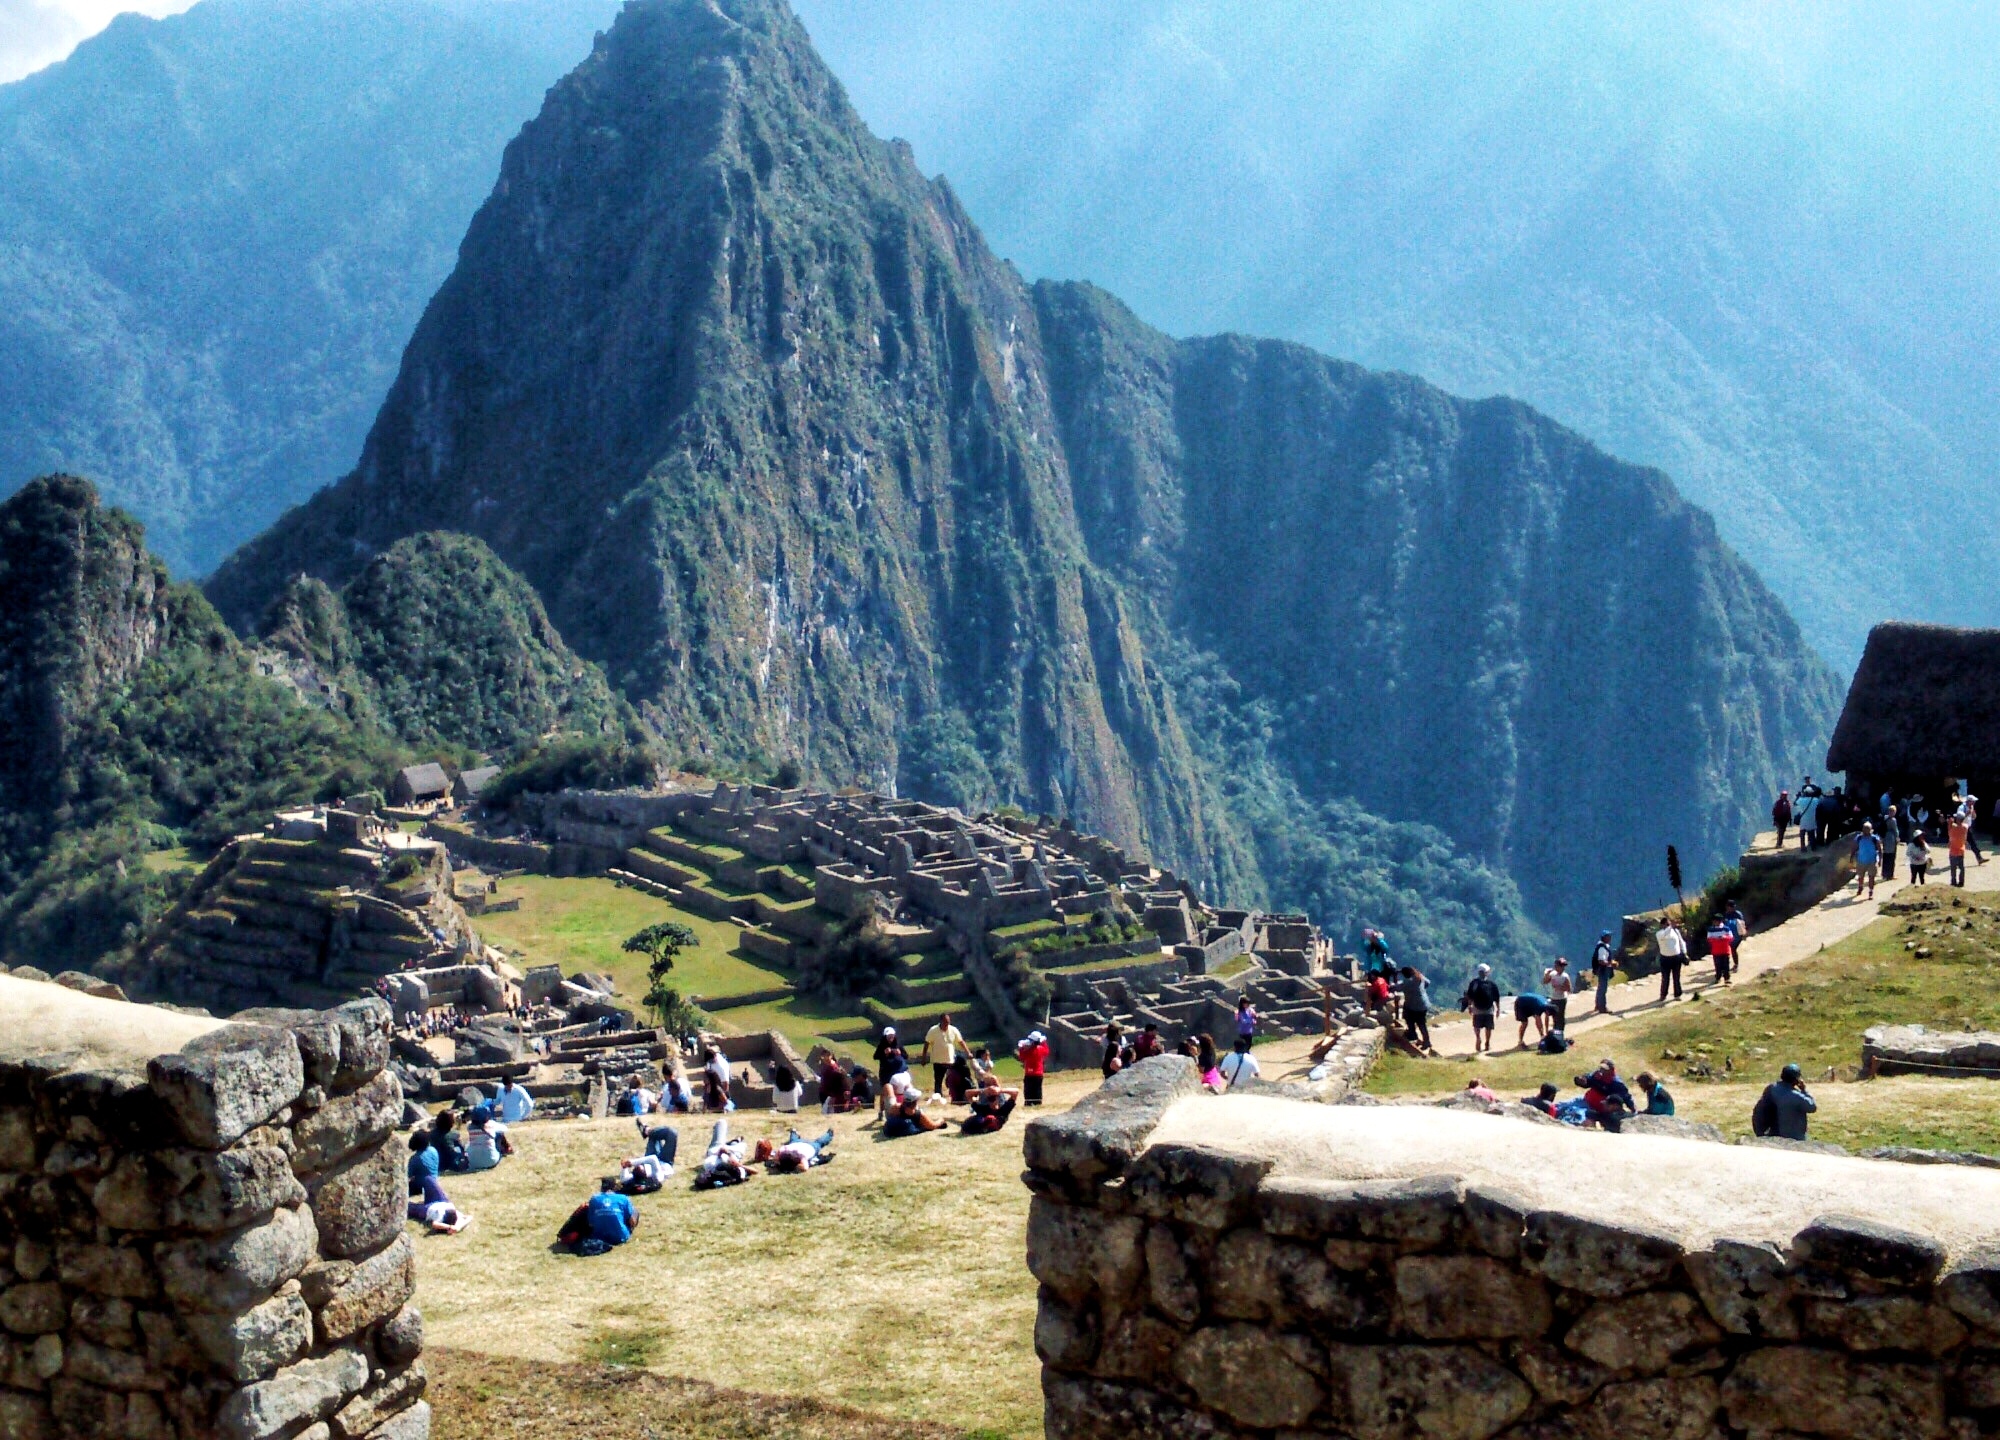 The view from Machu Picchu